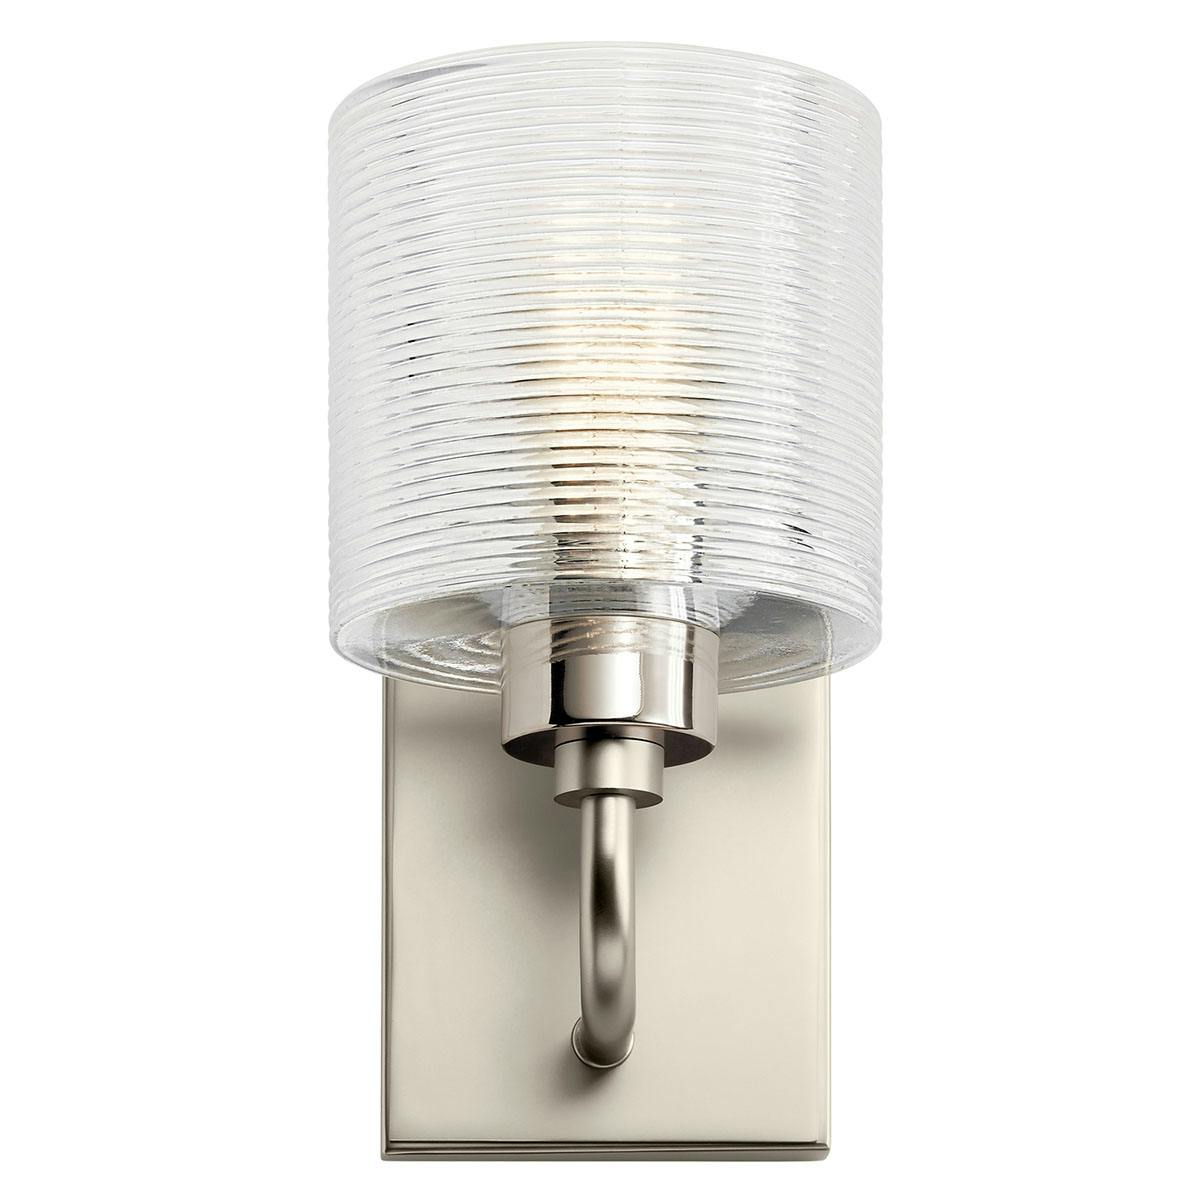 Front view of the Harvan 9.25" 1 Light Sconce Nickel on a white background